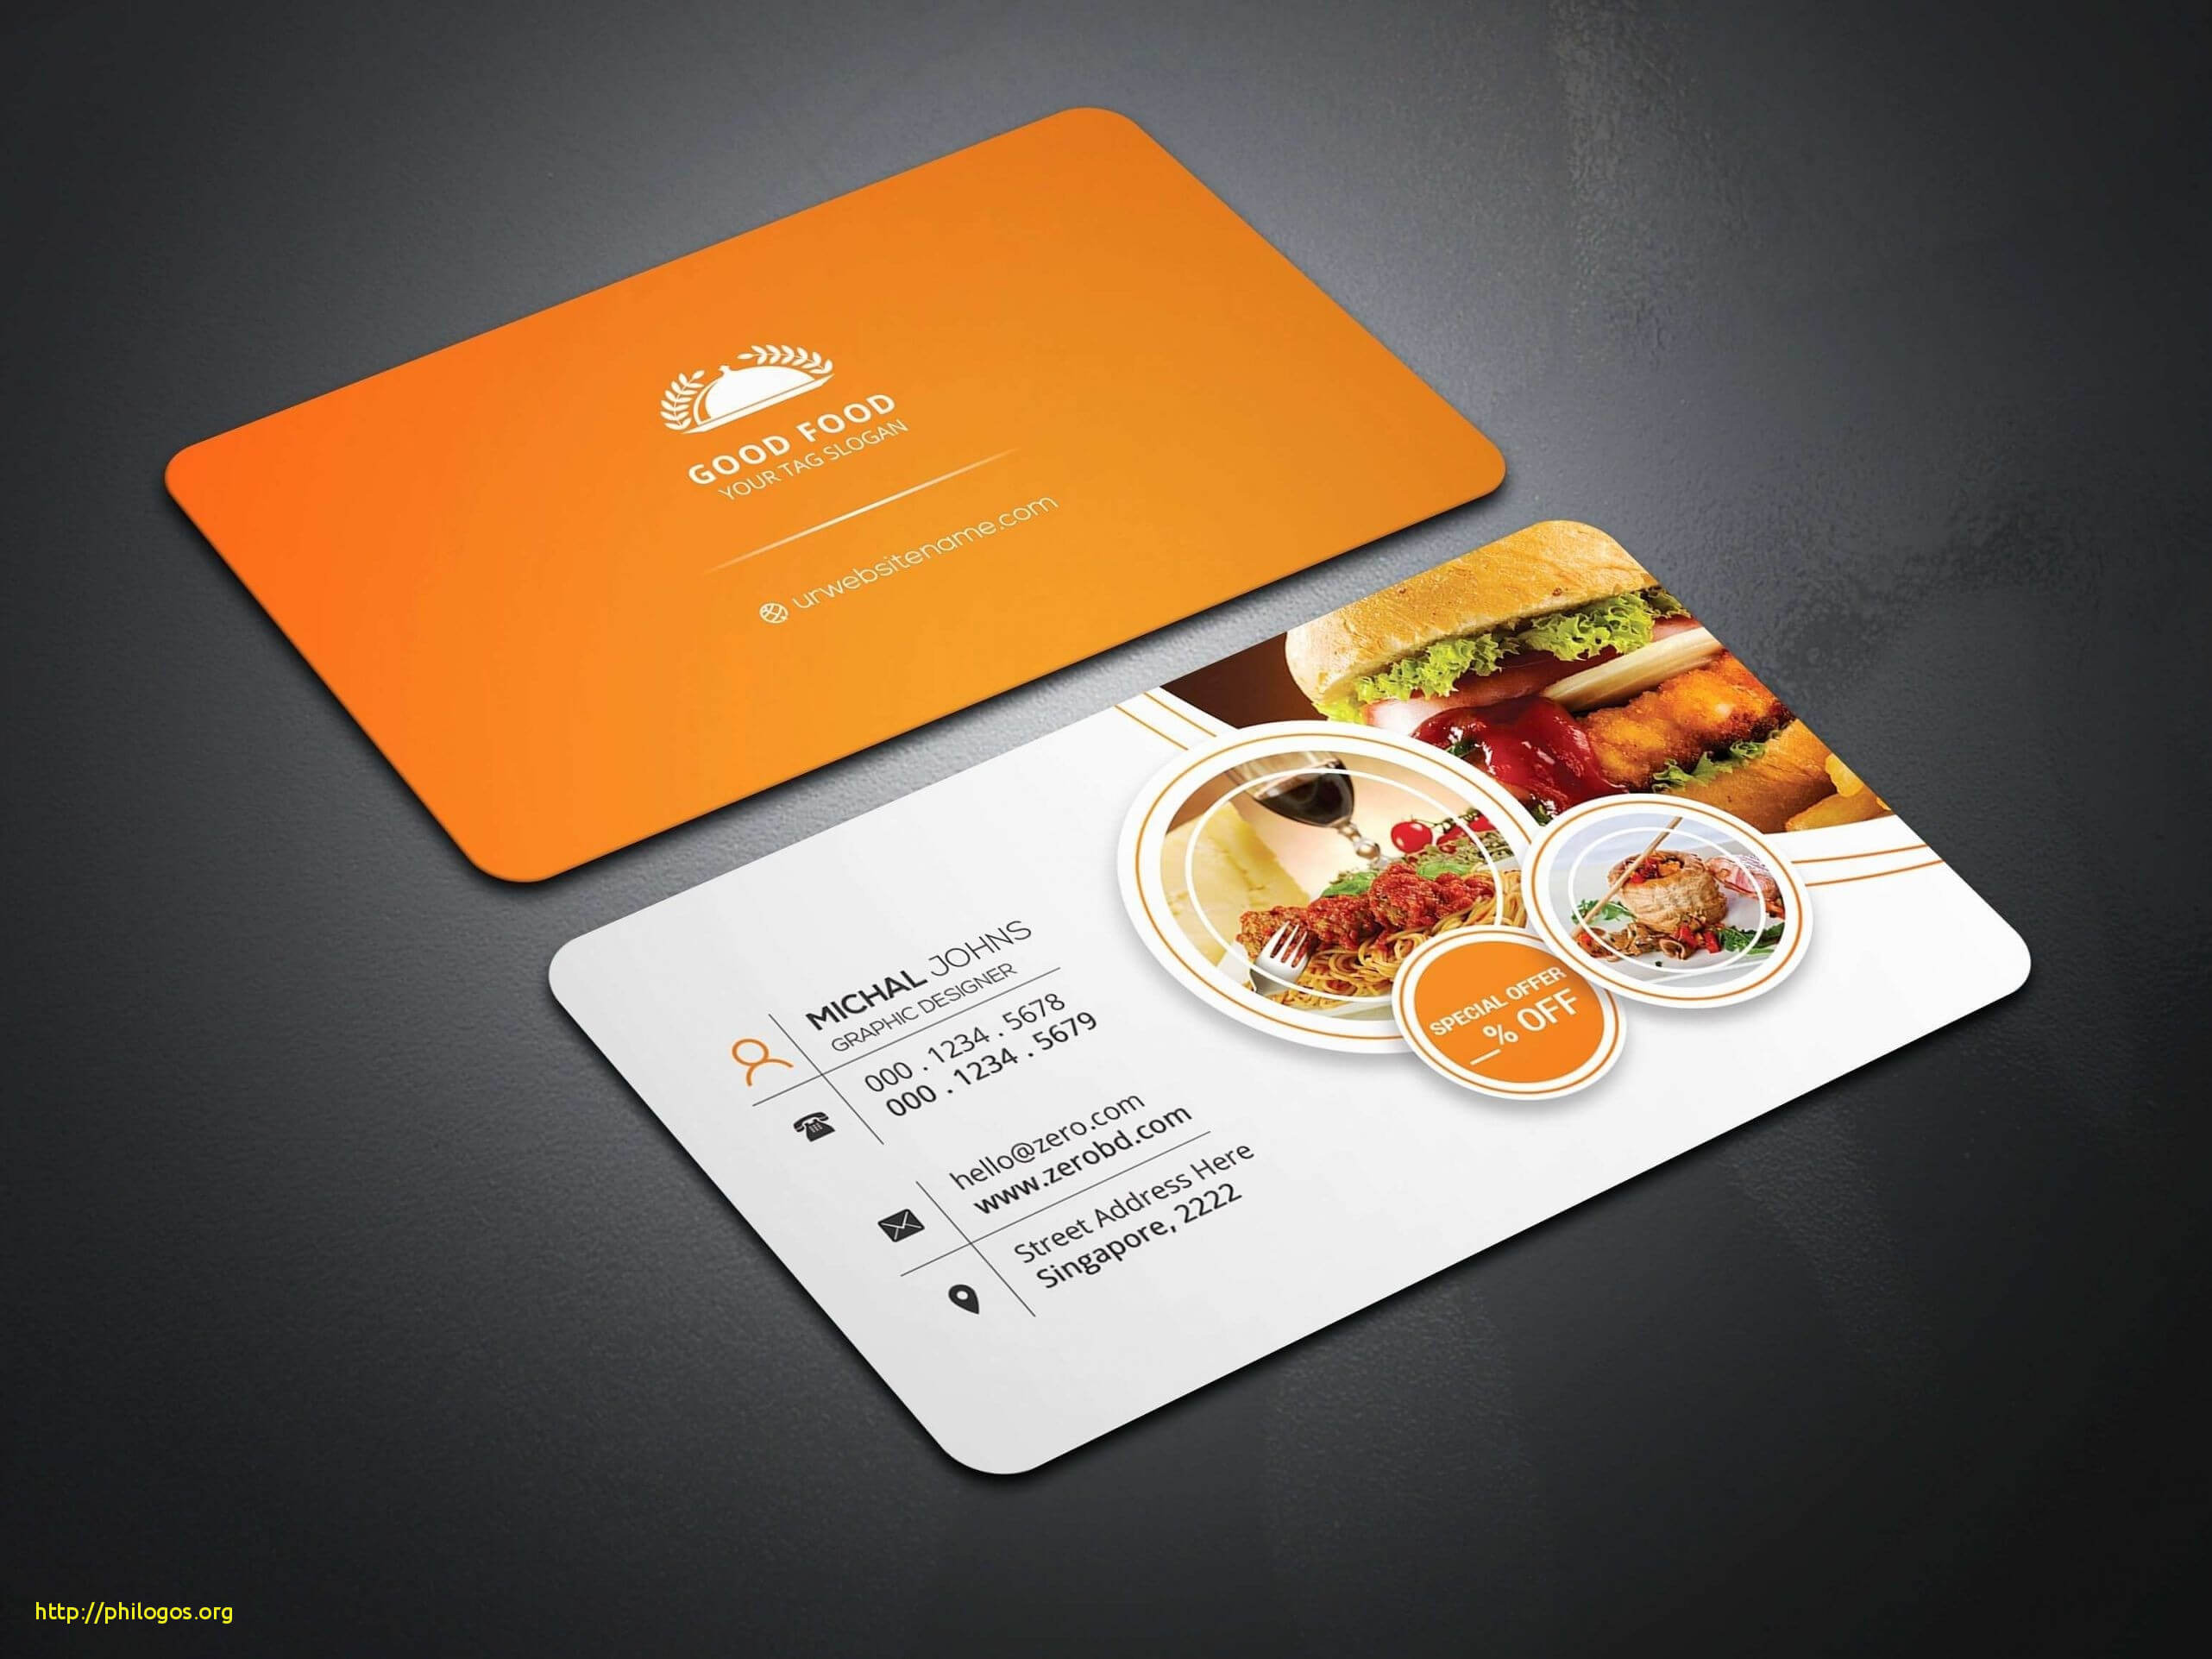 Inspirational Food Business Cards Templates Free | Philogos With Restaurant Business Cards Templates Free